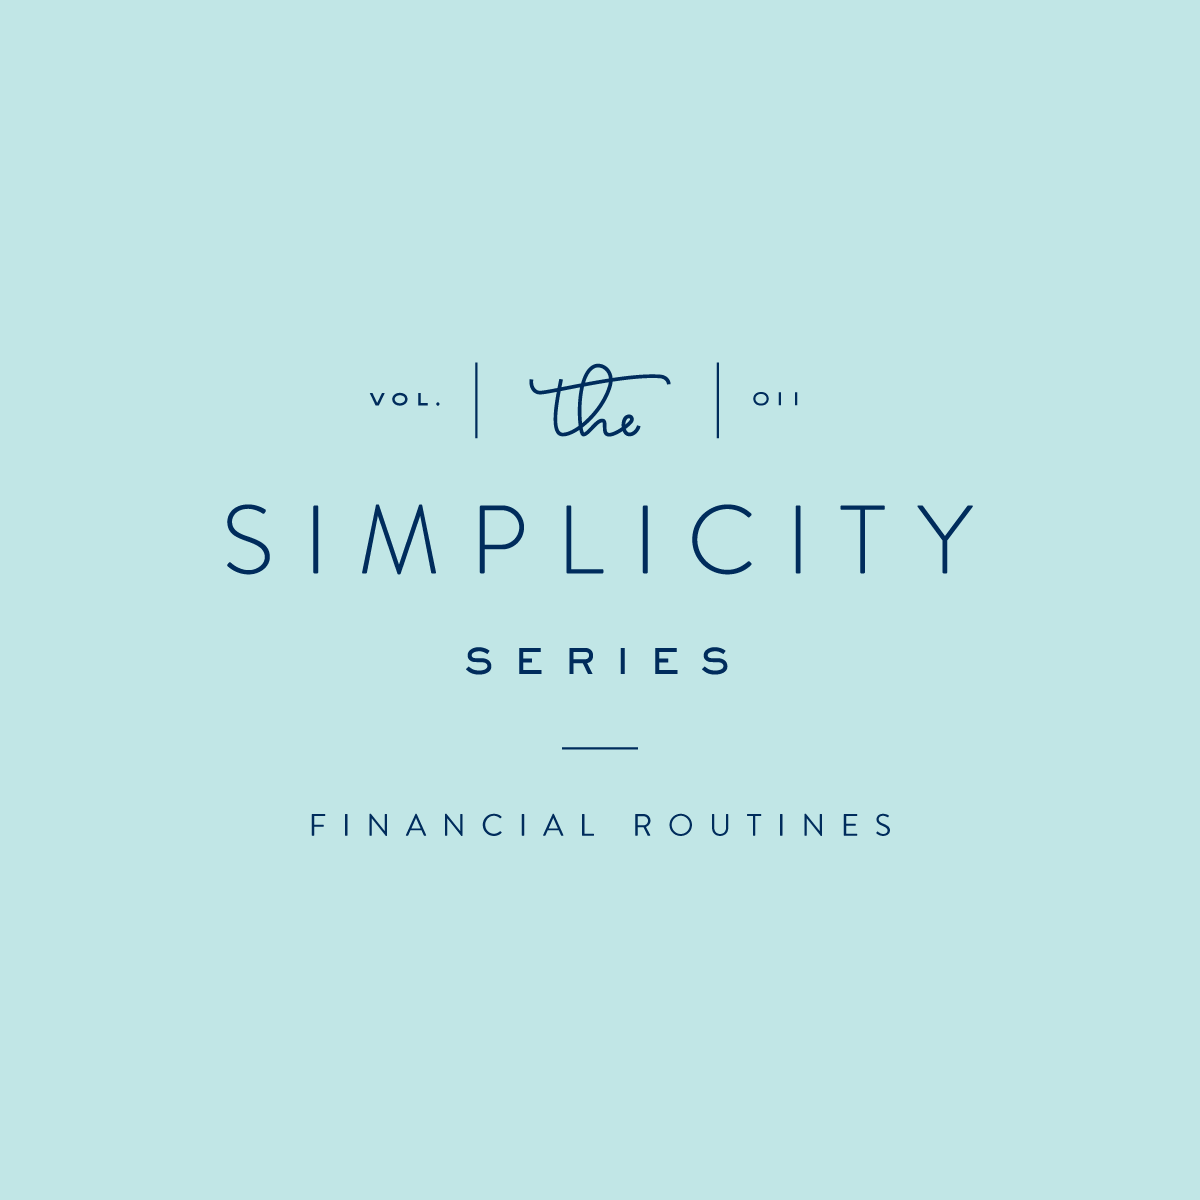 Simplified Finances: Monthly Routines